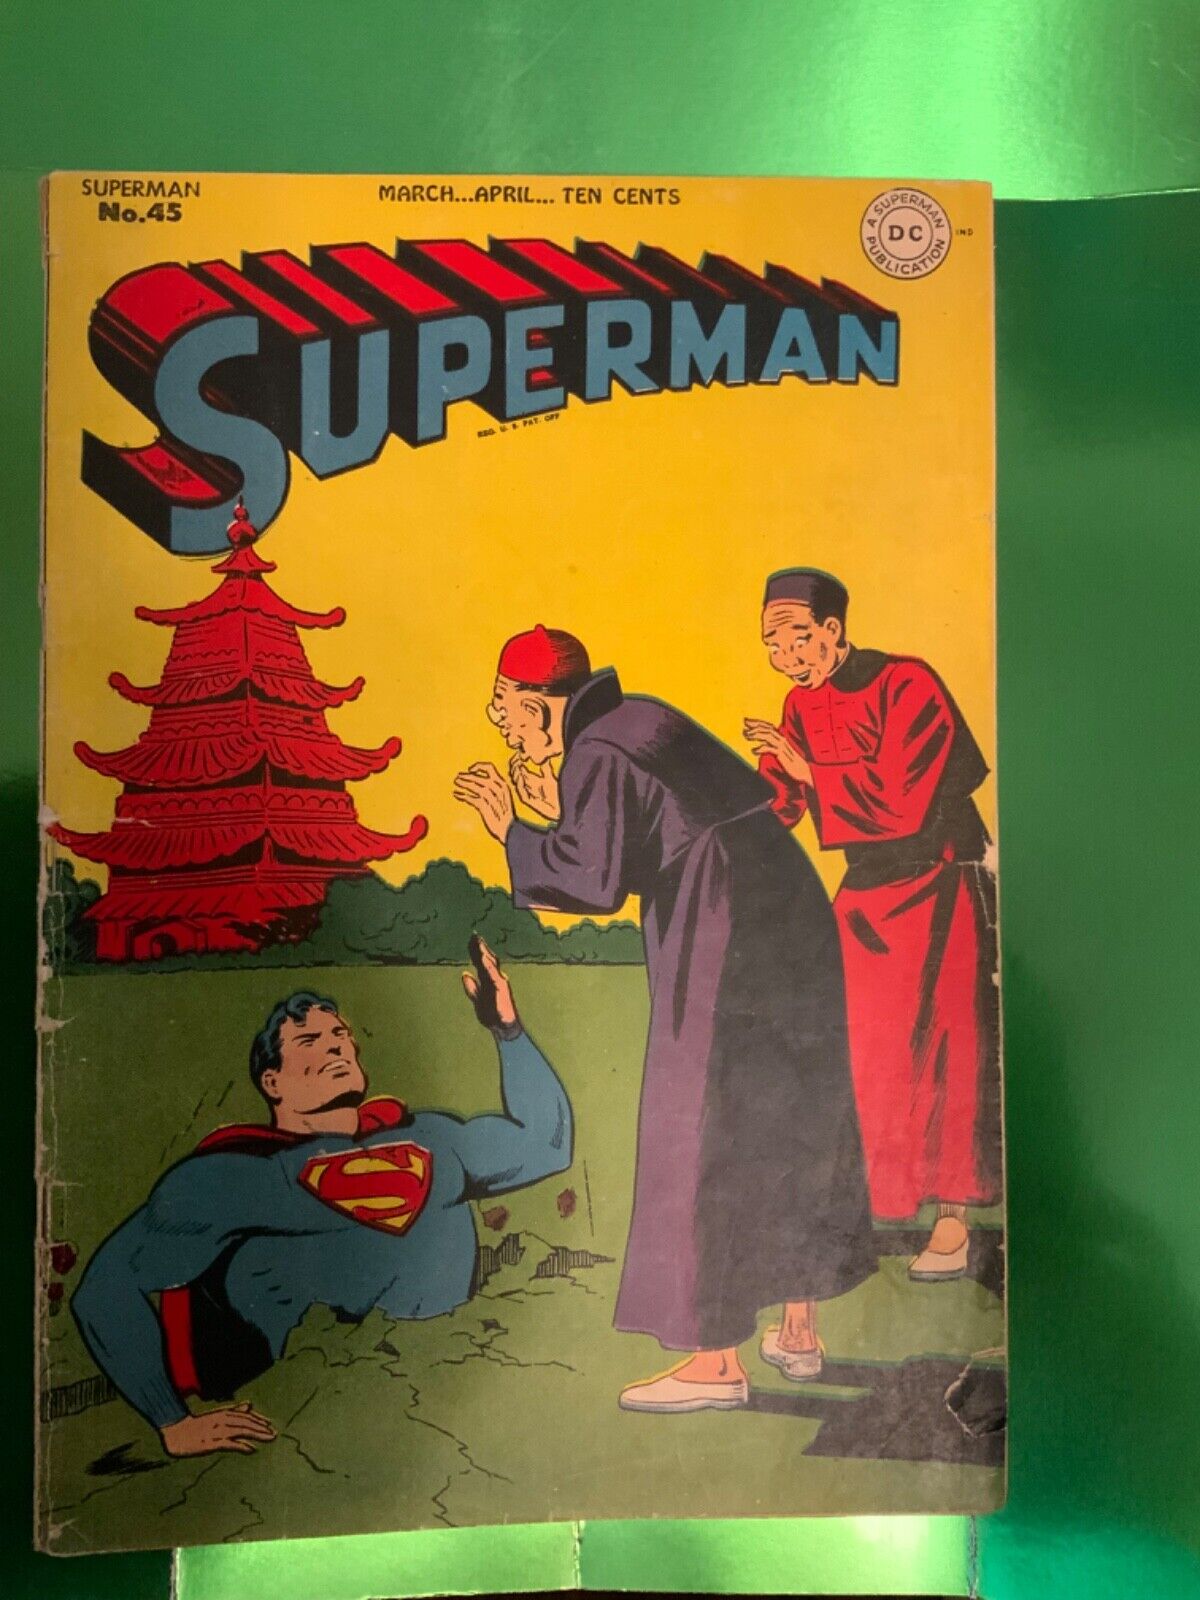 Superman #45 (1947) - LOIS LANE AS SUPERWOMAN Cover : Superman drills to China